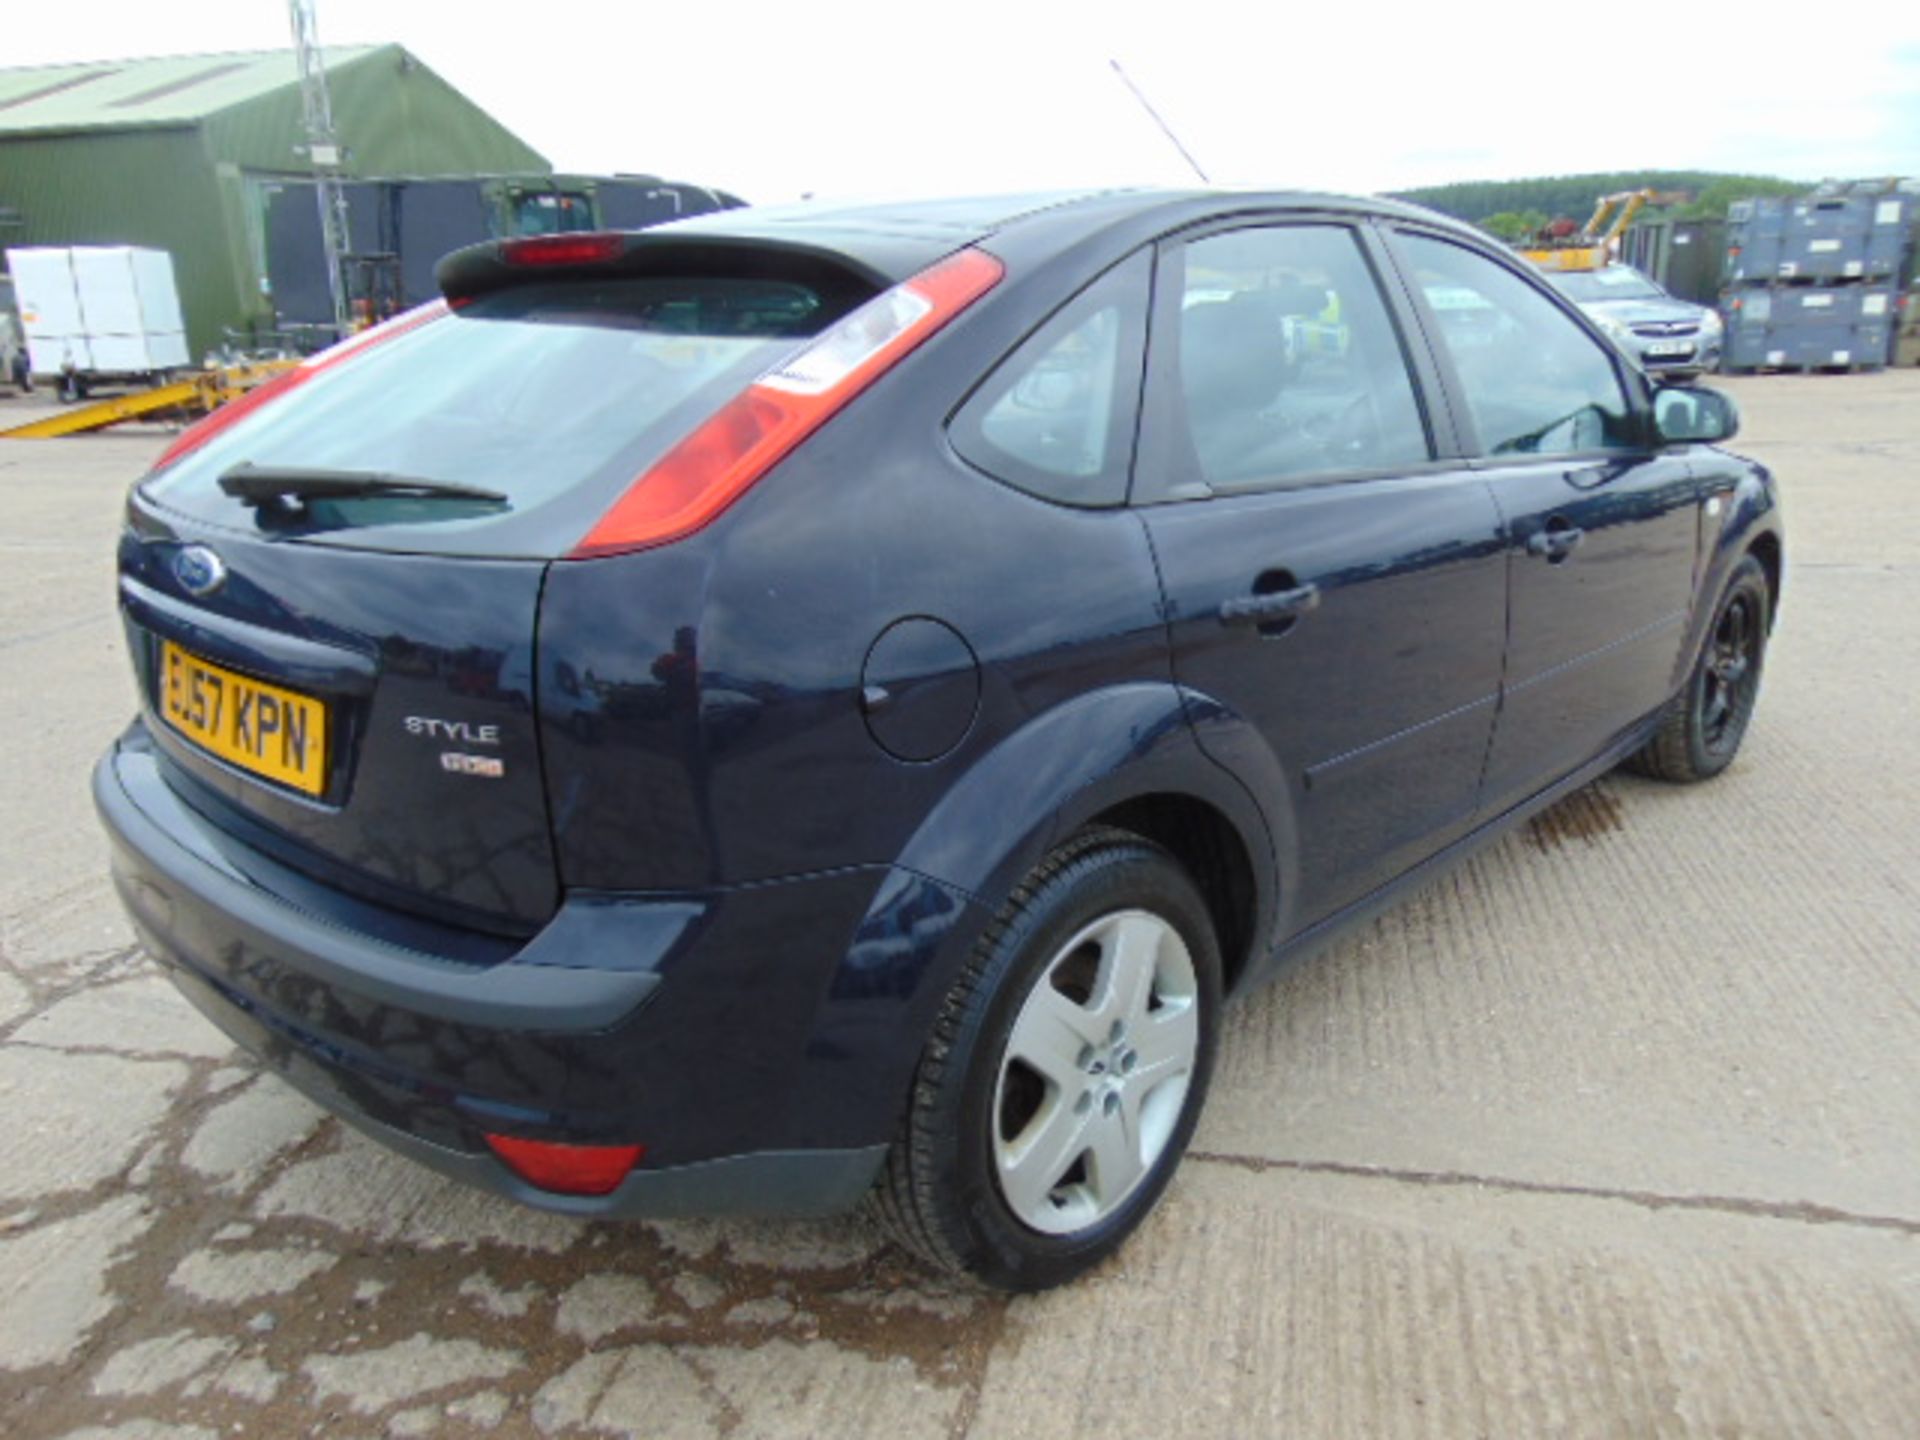 2008 Ford Focus 1.8 TDCI Style Hatchback - Image 6 of 18